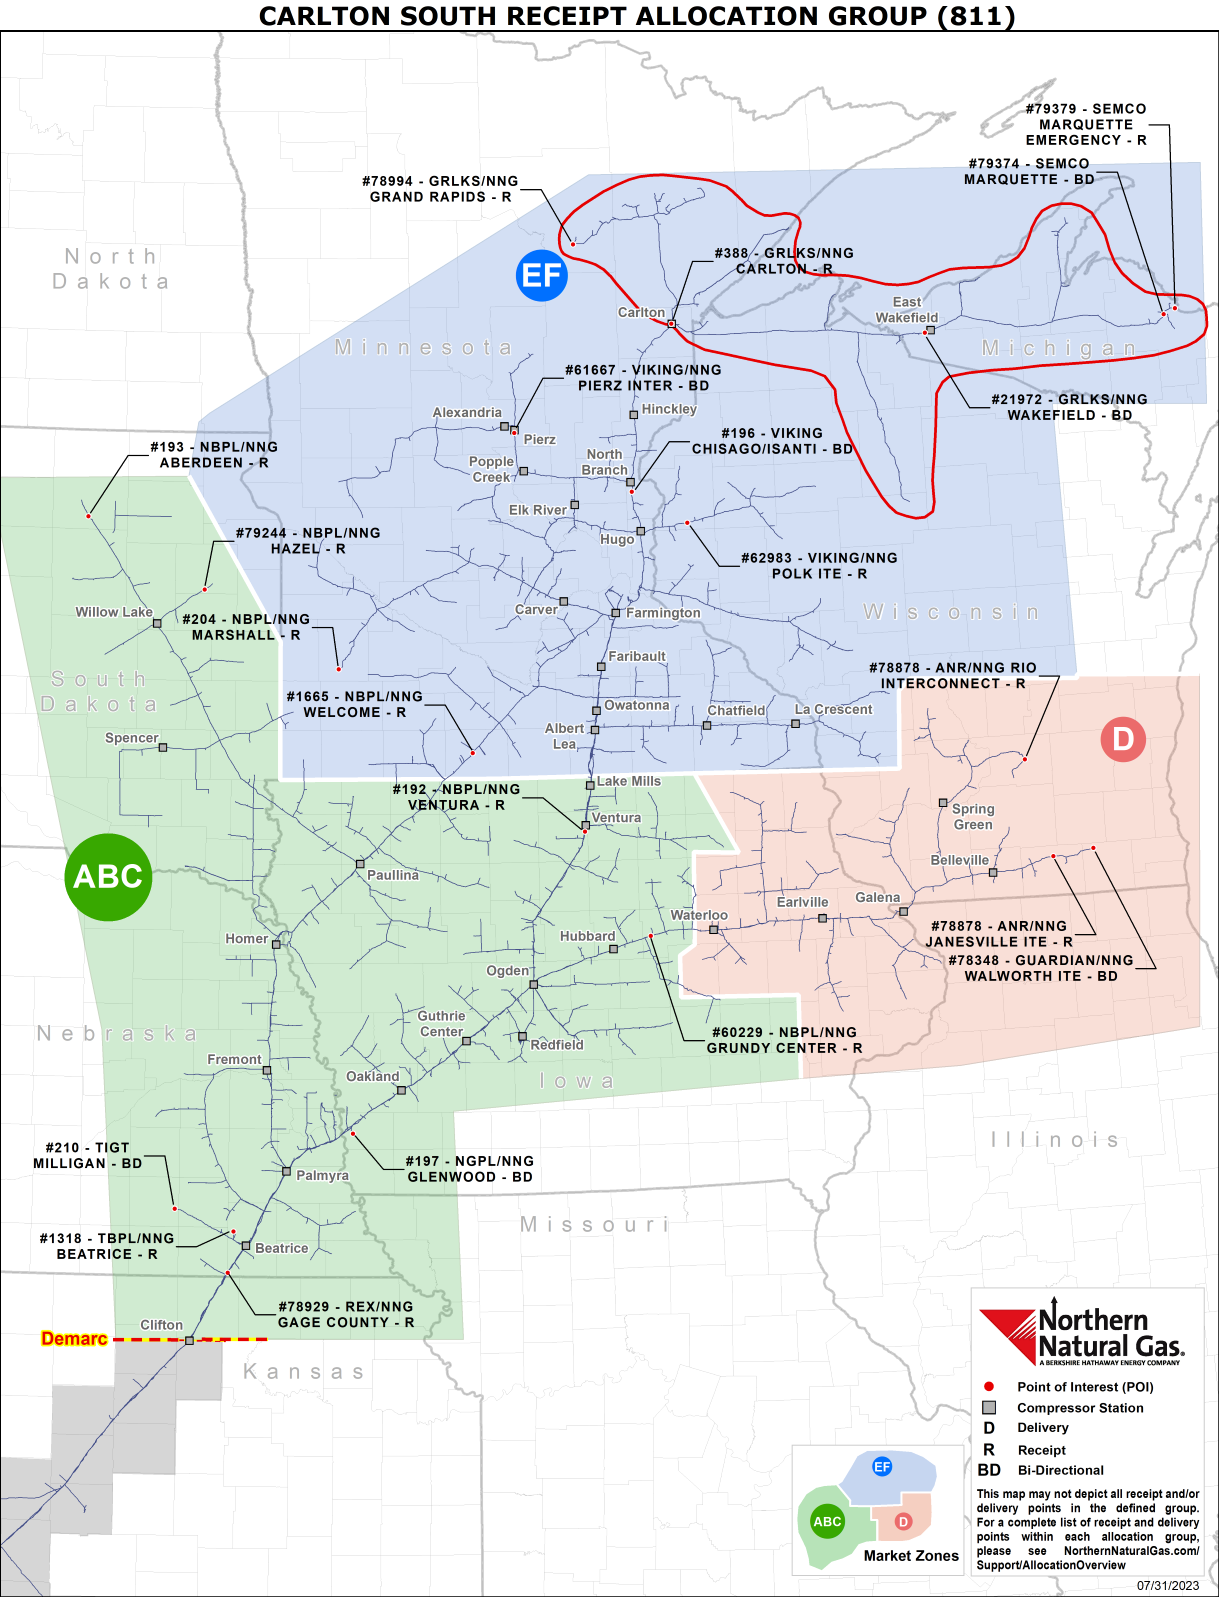 (811) Carlton South Allocation Group Map